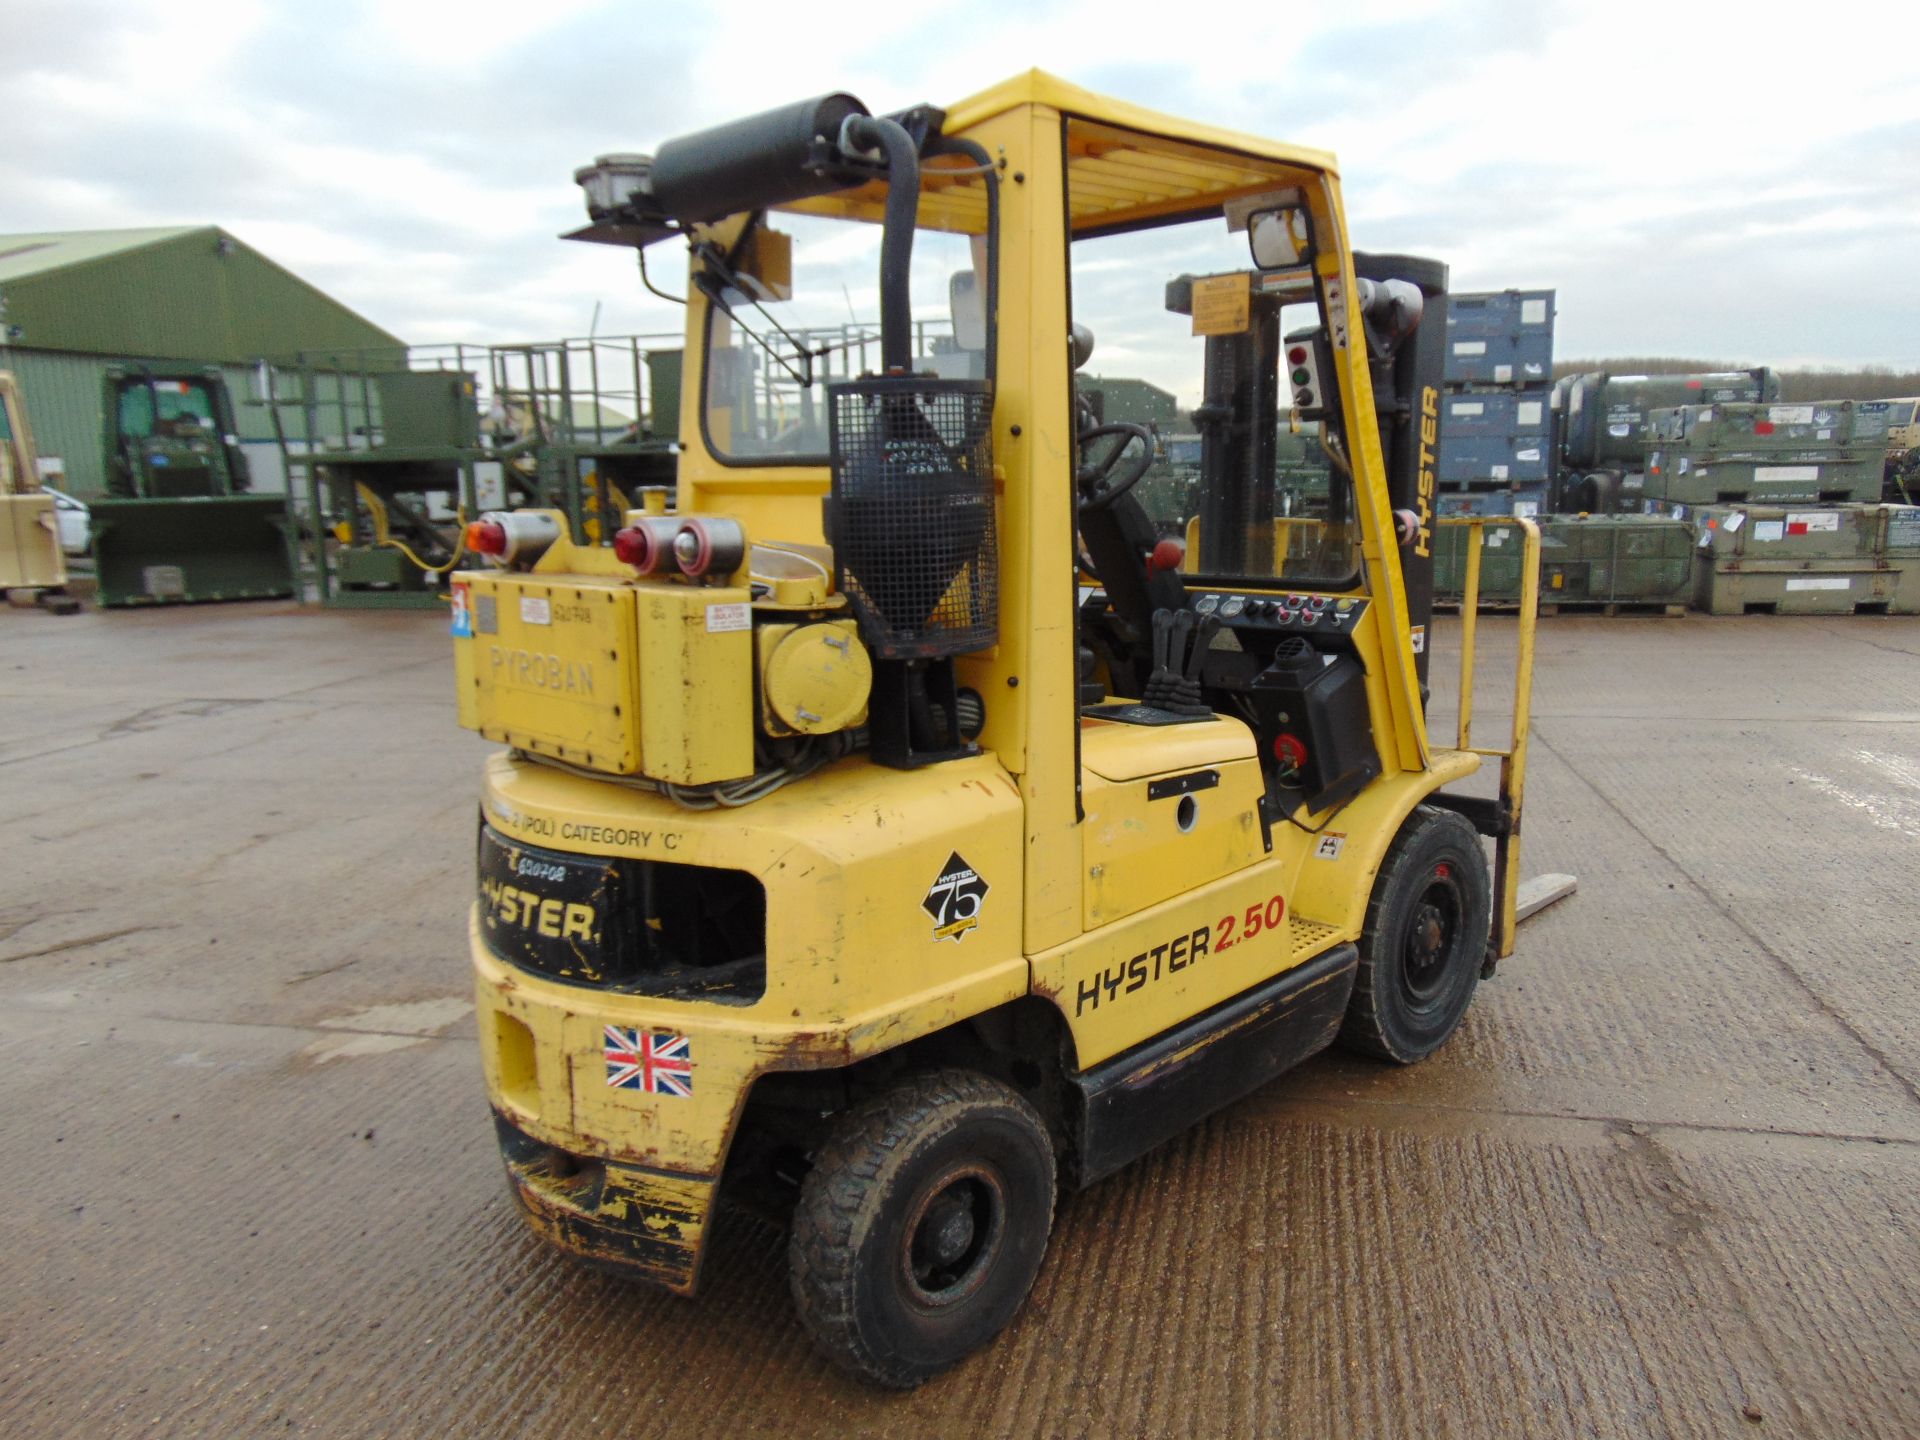 Hyster 2.50 Class C, Zone 2 Protected Diesel Forklift - Image 6 of 22